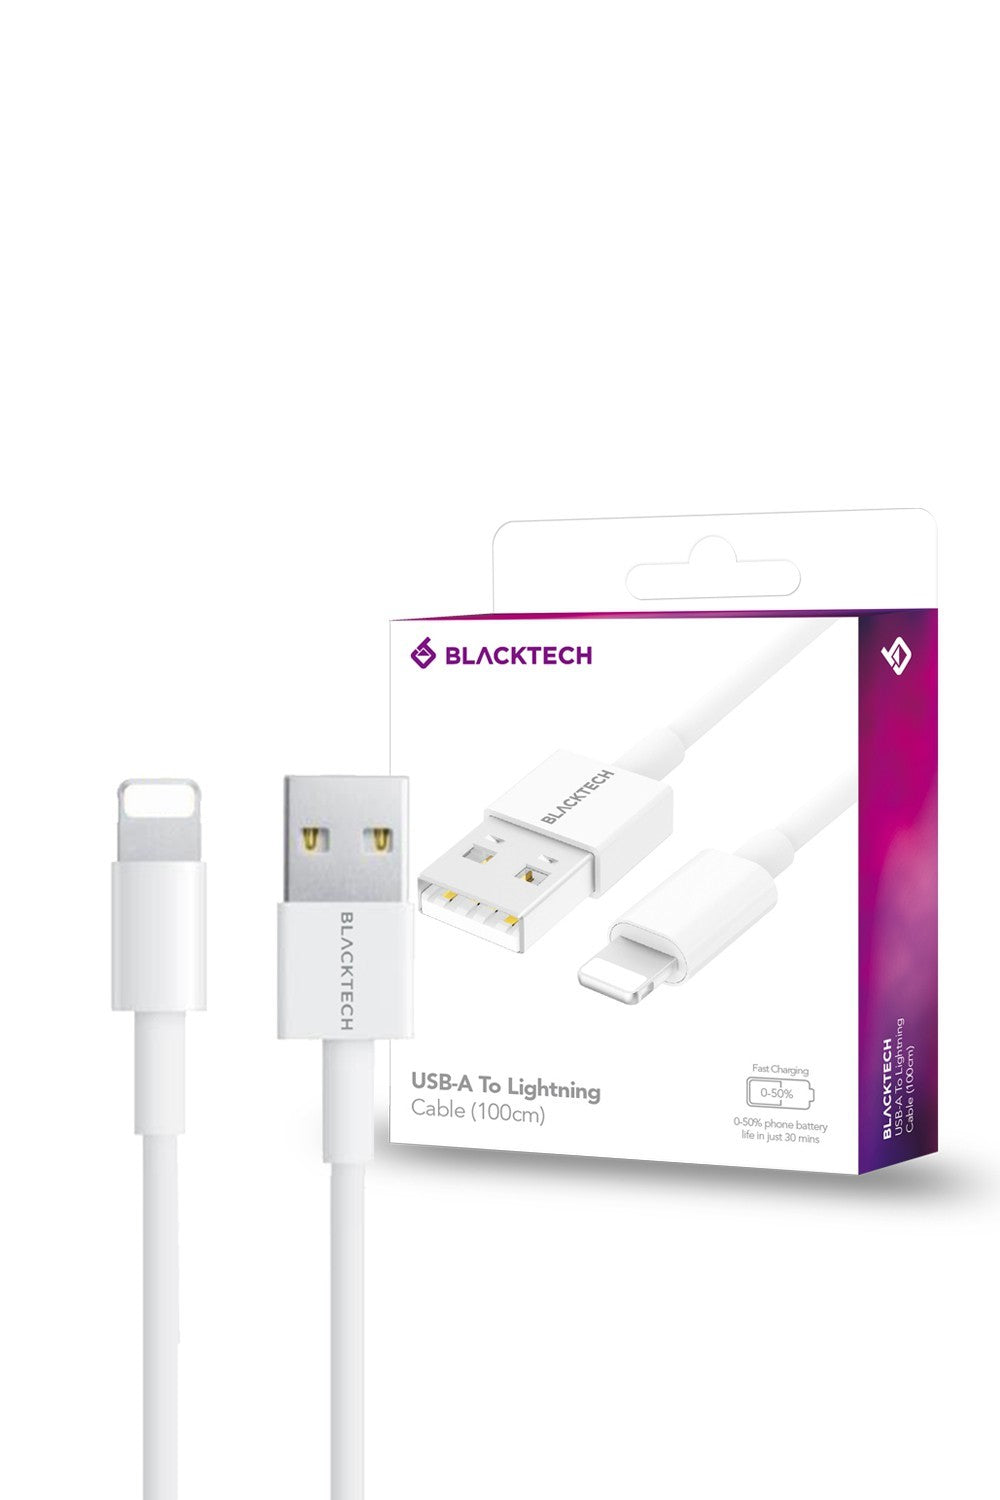 Blacktech USB to Lightning Fast Charging Data Cable for iPhone iPad